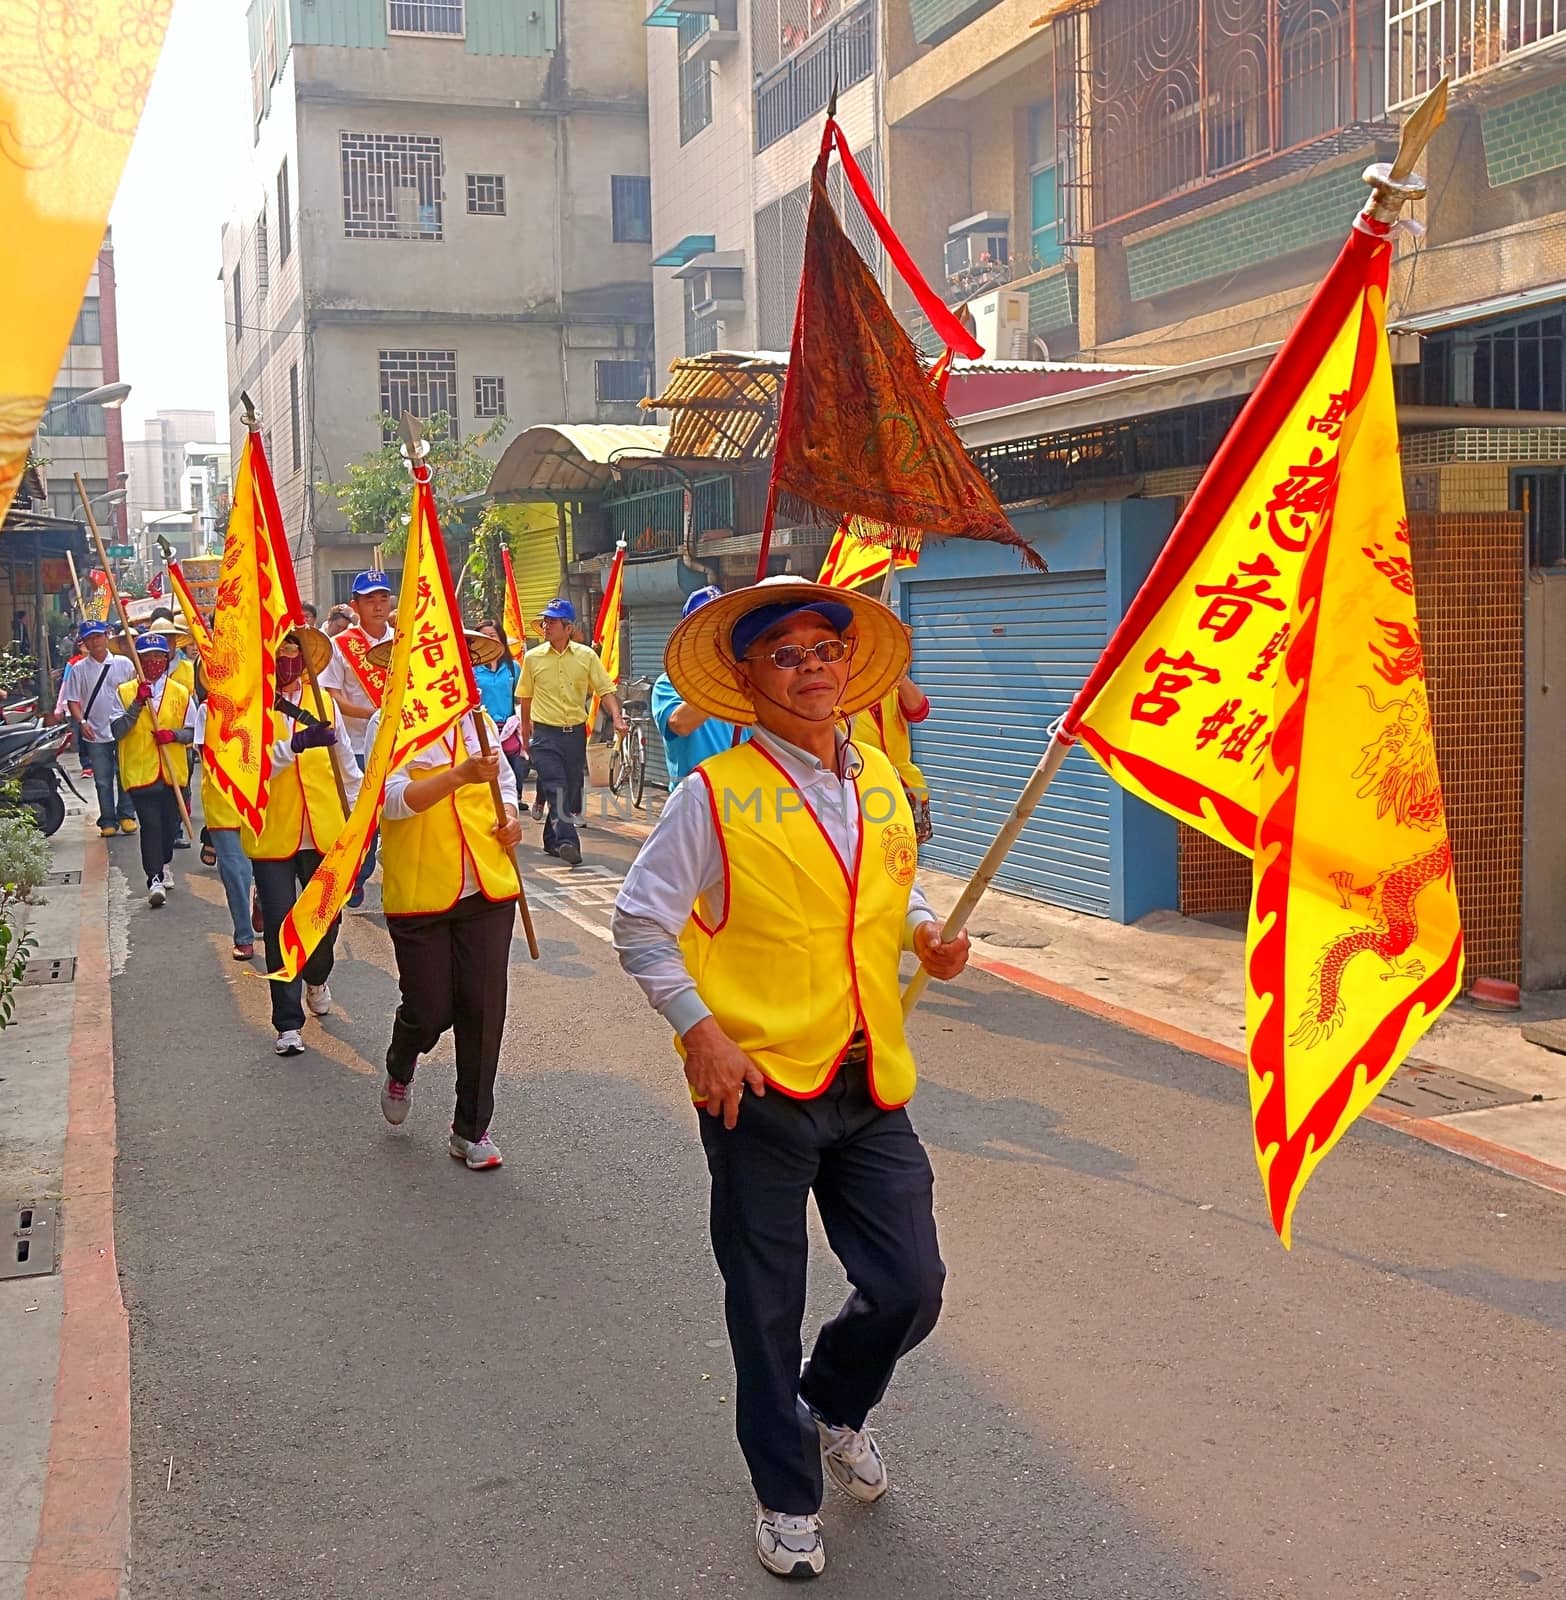 KAOHSIUNG, TAIWAN -- MARCH 16, 2014: Religious devotees in yellow vests carry flags in a procession that is part of a local religious ceremony.